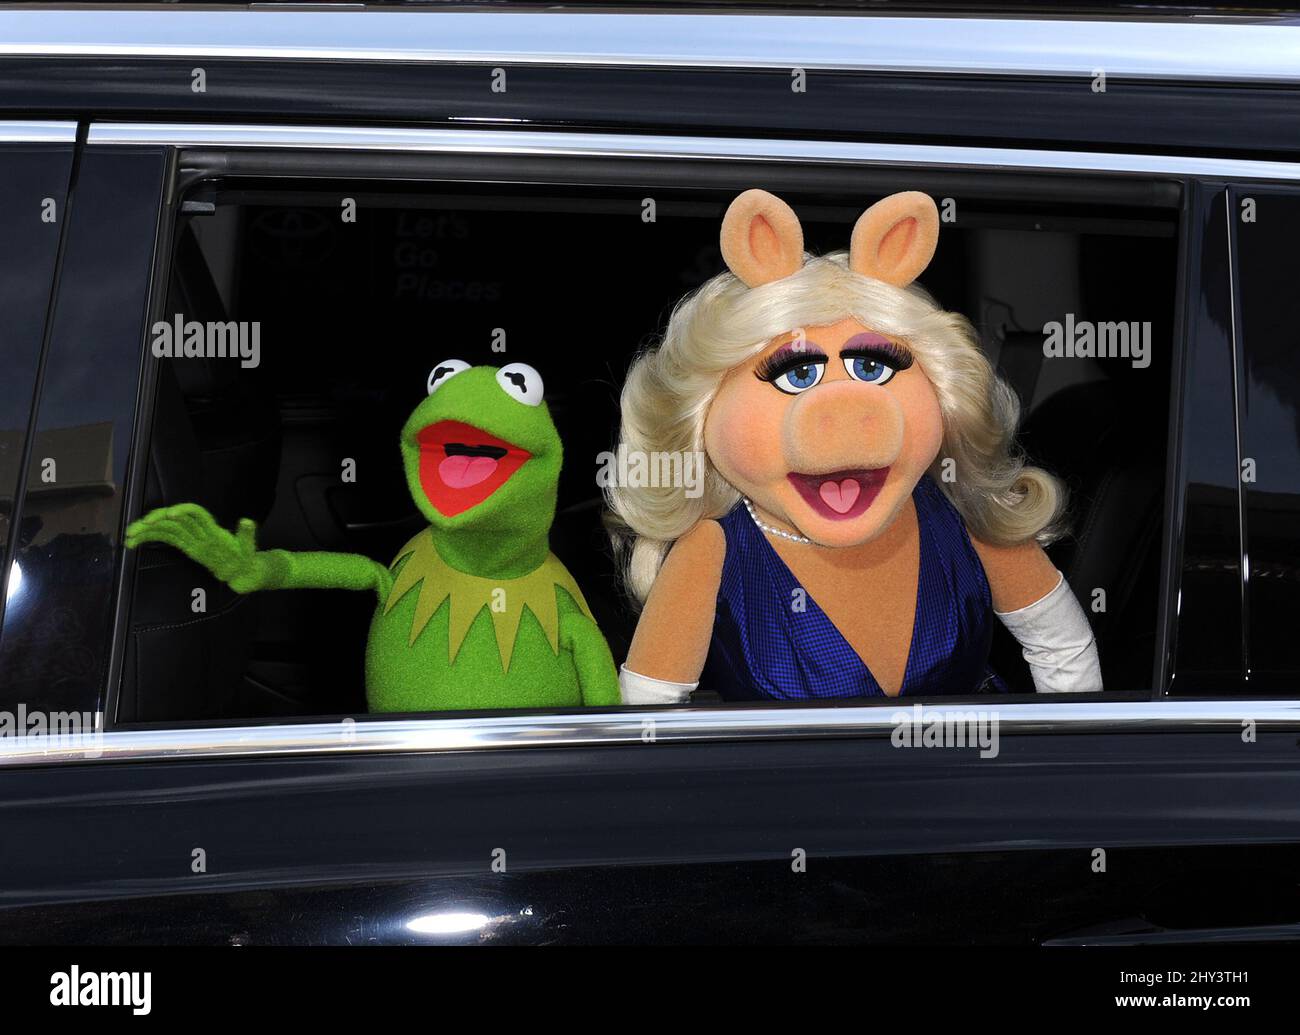 Kermit the Frog & Miss Piggy (The Muppets) attending the Muppets Most Wanted Los Angeles Premiere at the El Capitan theatre Stock Photo